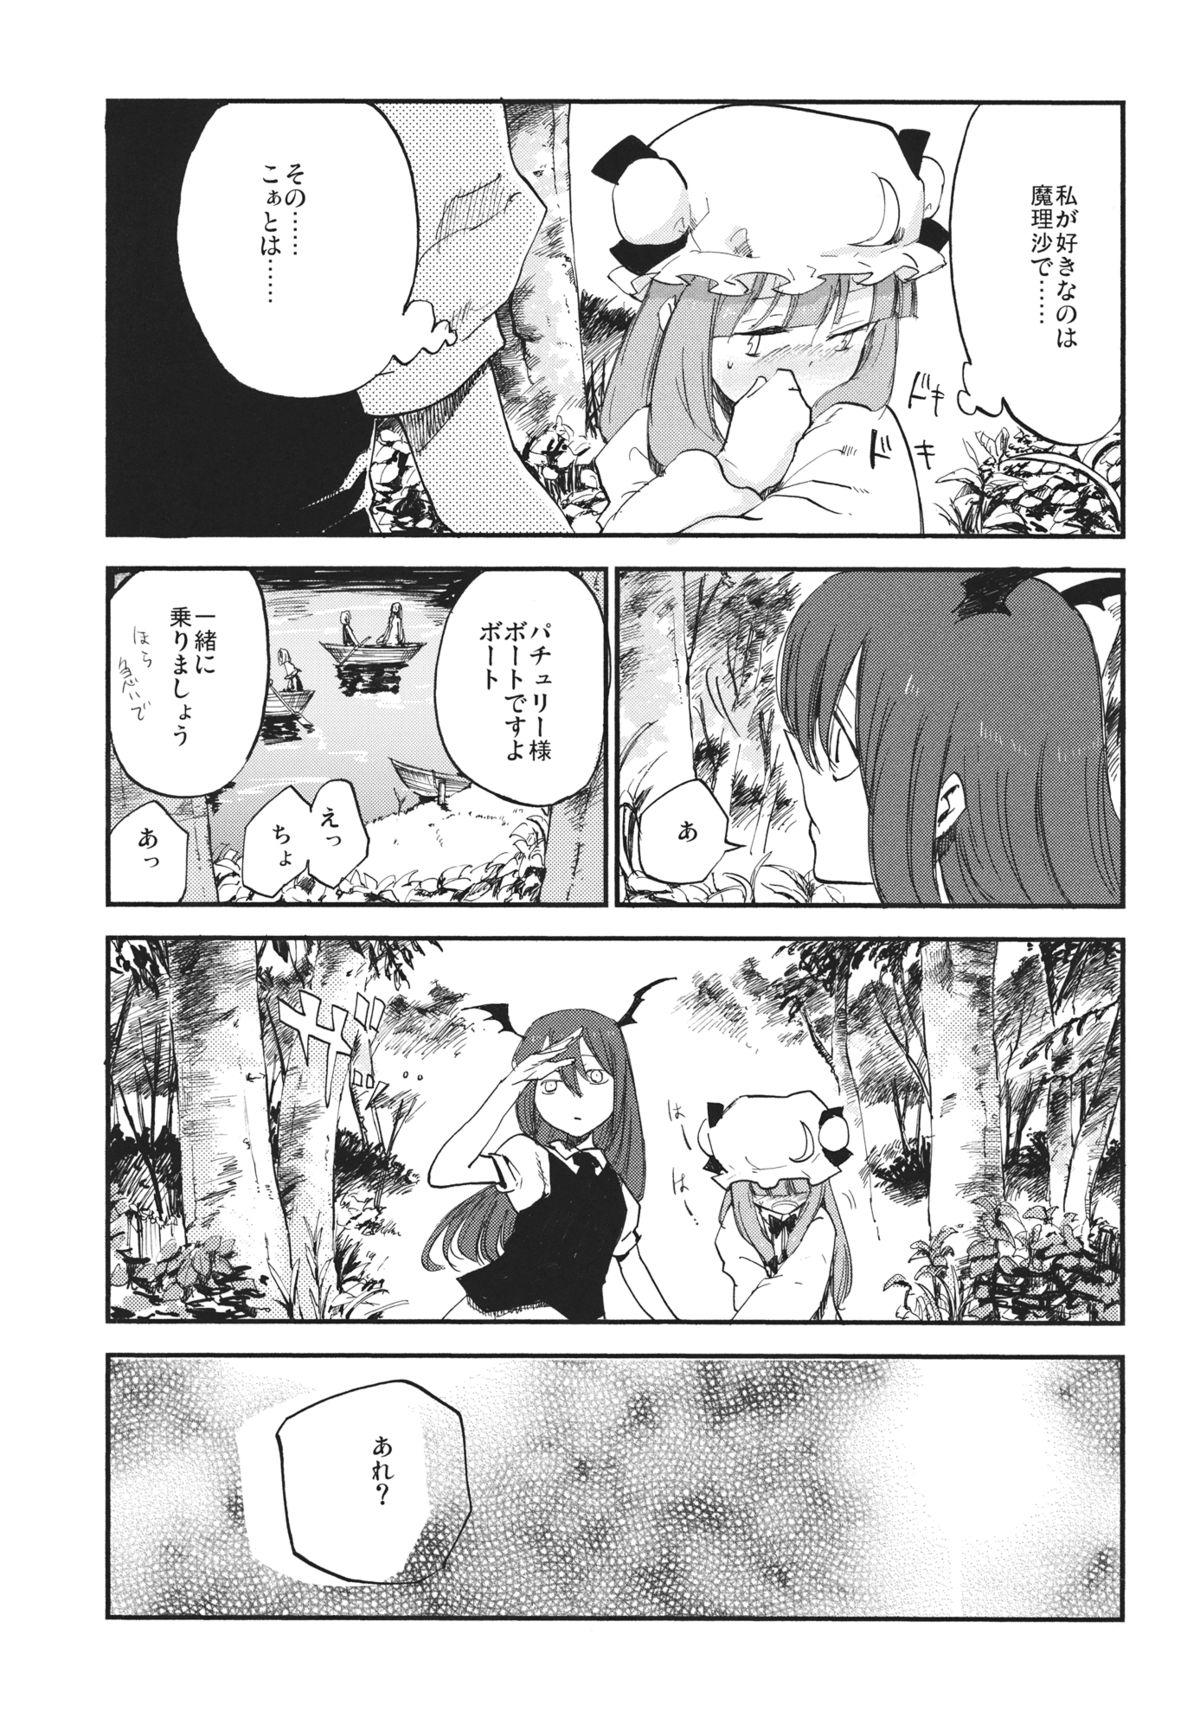 Letsdoeit Donten Library - Touhou project Shemale Sex - Page 10